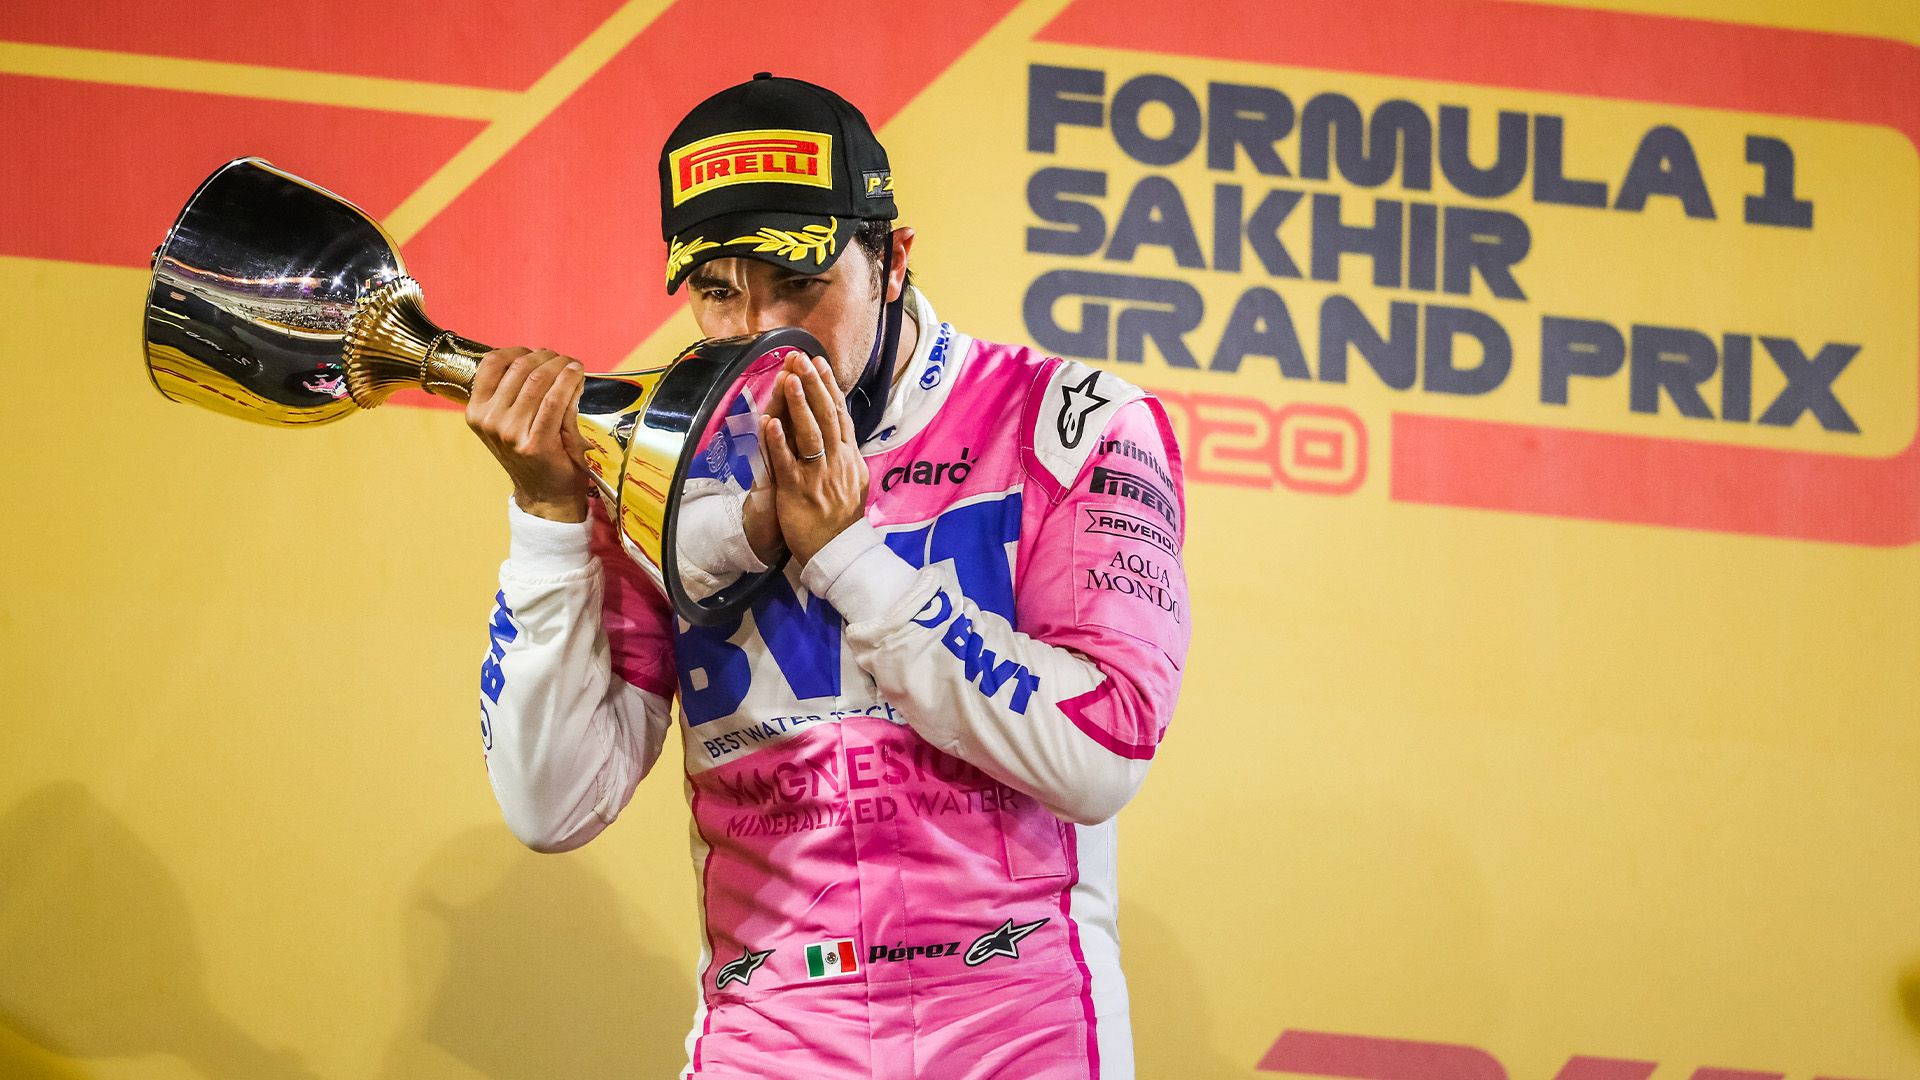 Sergio-Perez-kisses-his-trophy-after-winning-the-2020-Sakhir-Grand-Prix